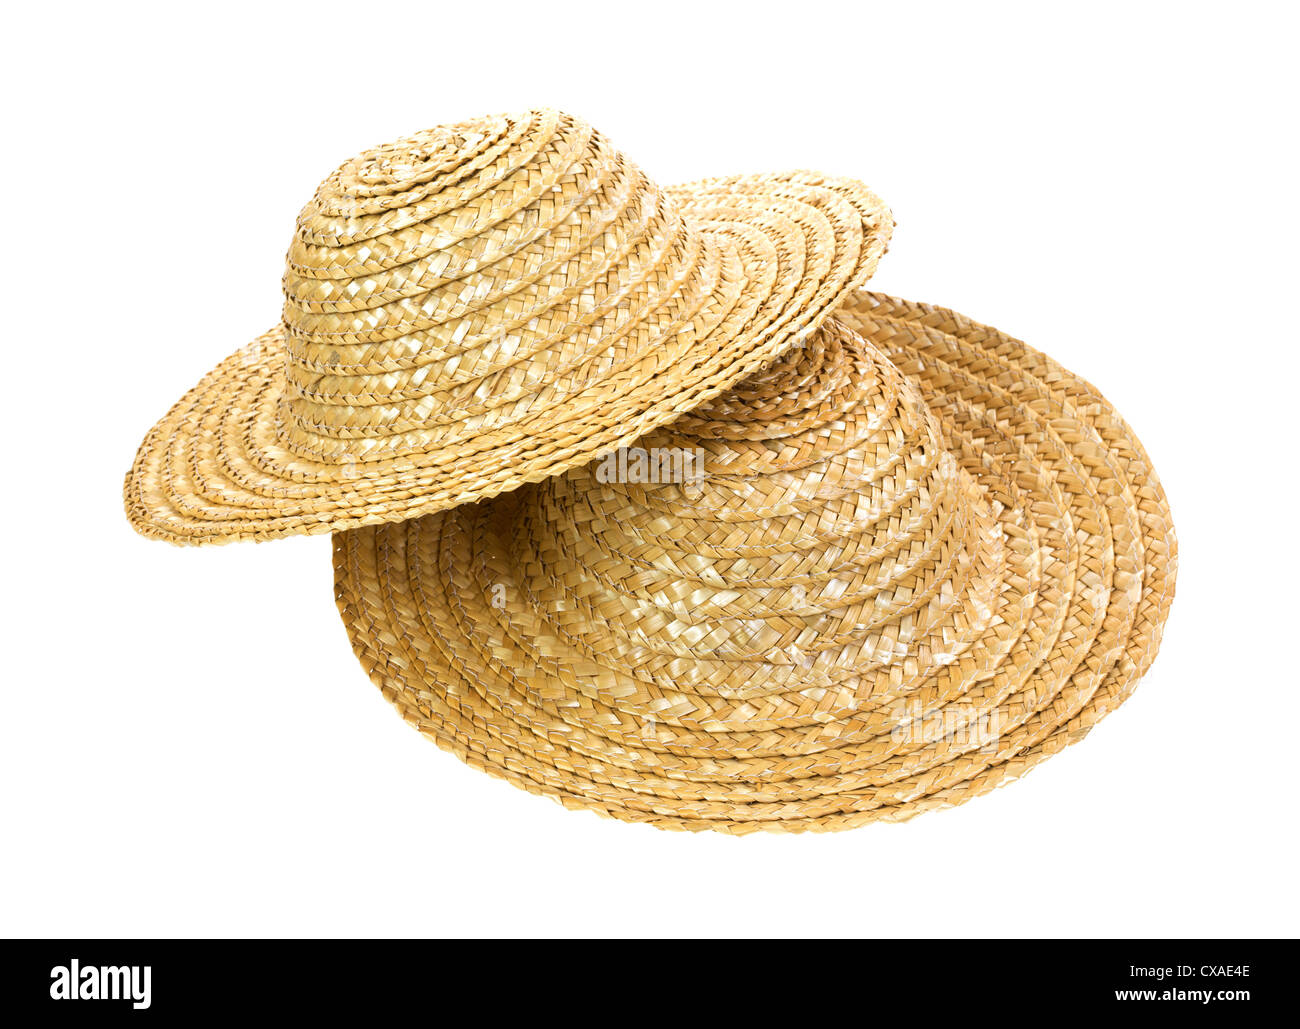 Two straw hats arranged with one atop the other on a white background. Stock Photo